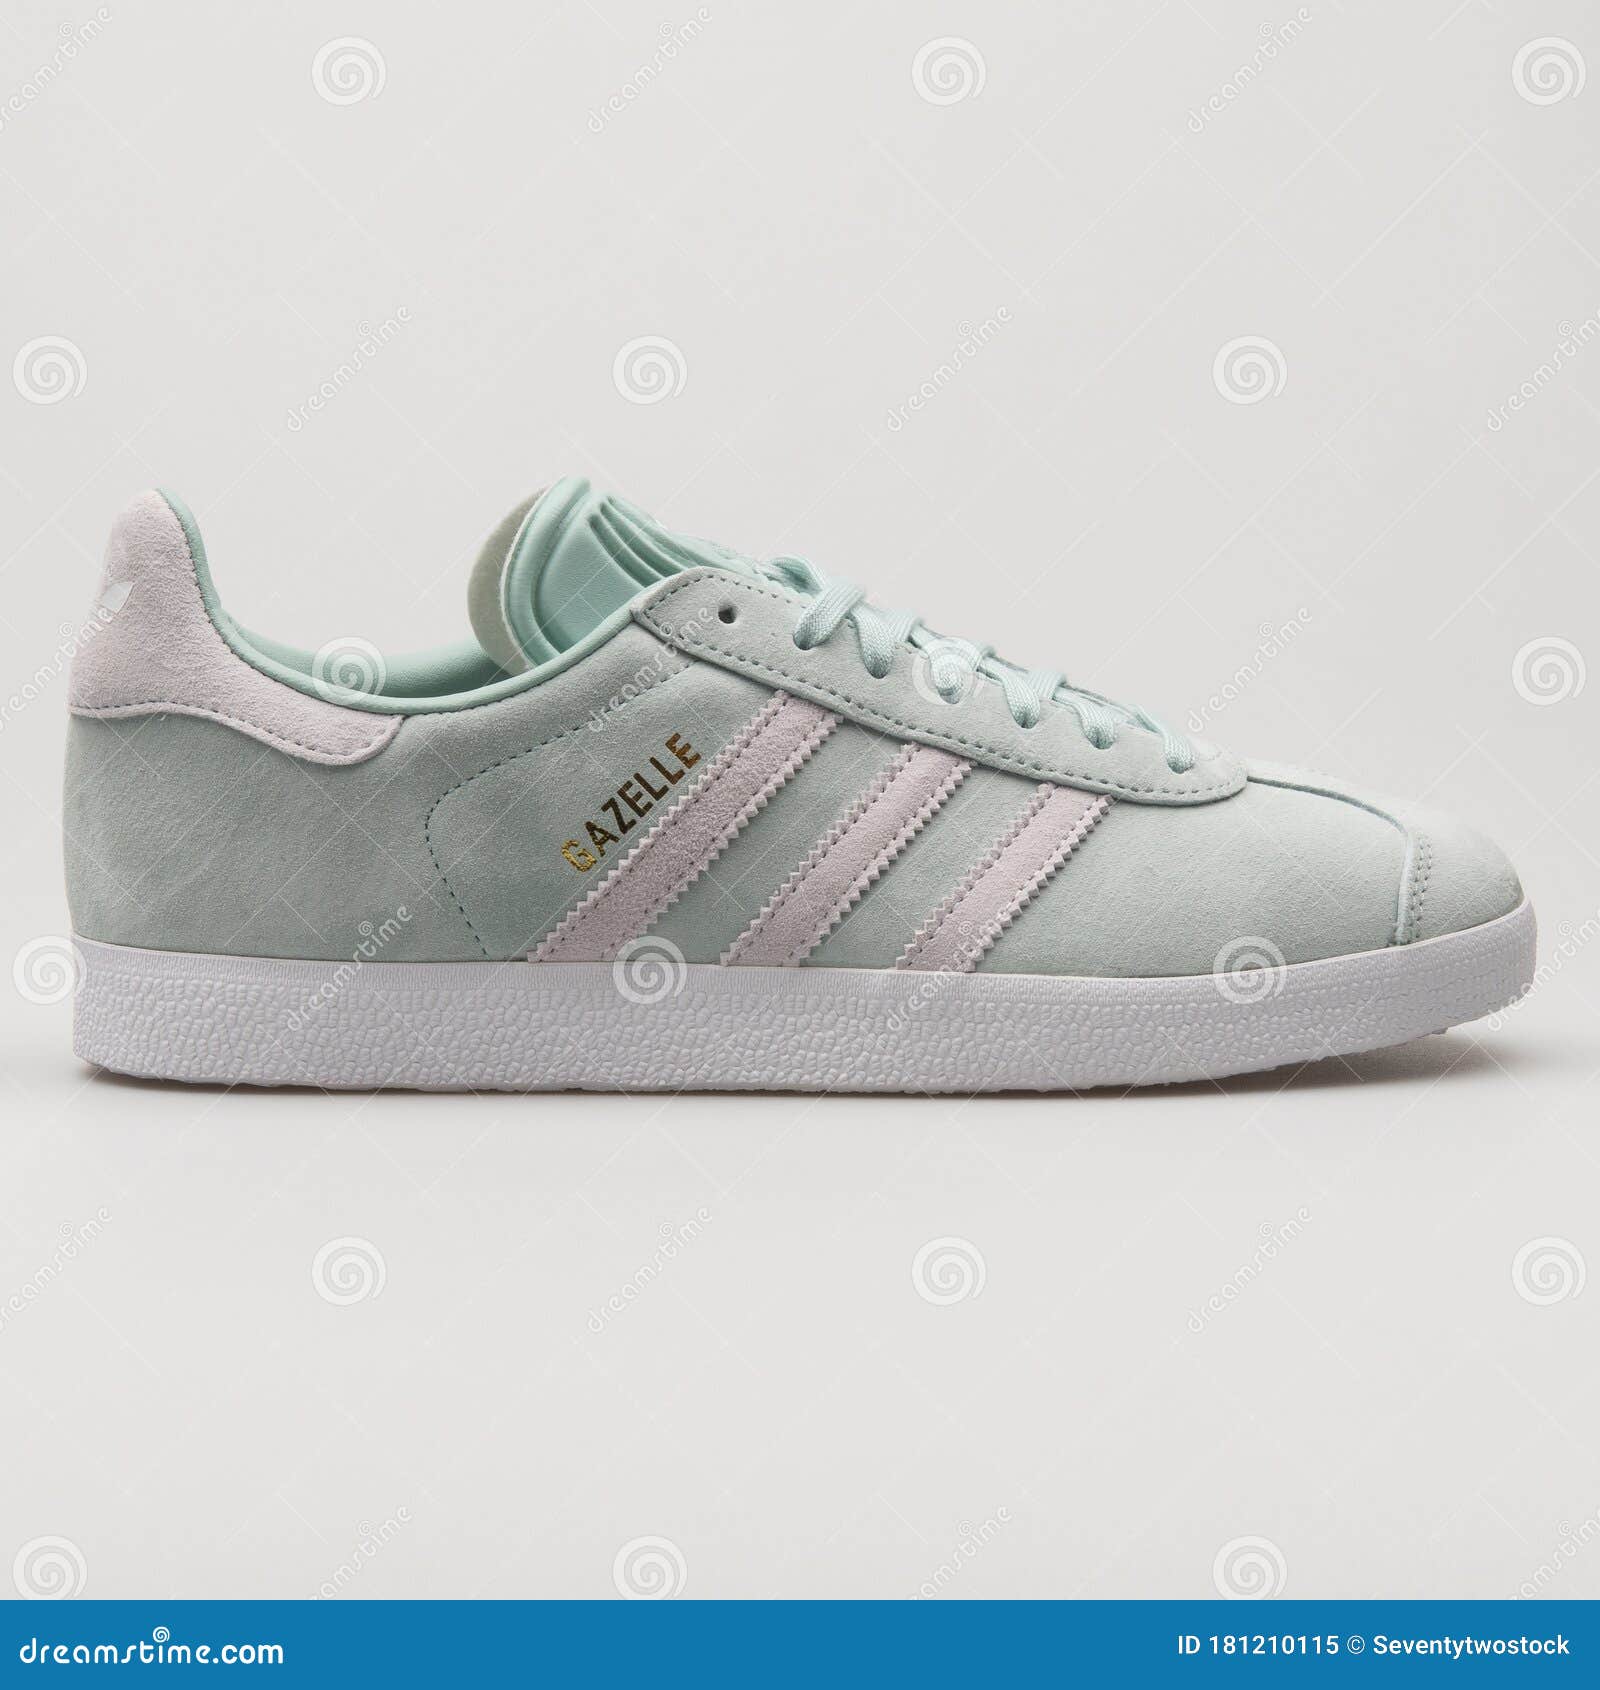 Adidas Gazelle Light Green Sneaker Editorial Image - of athletic: 181210115